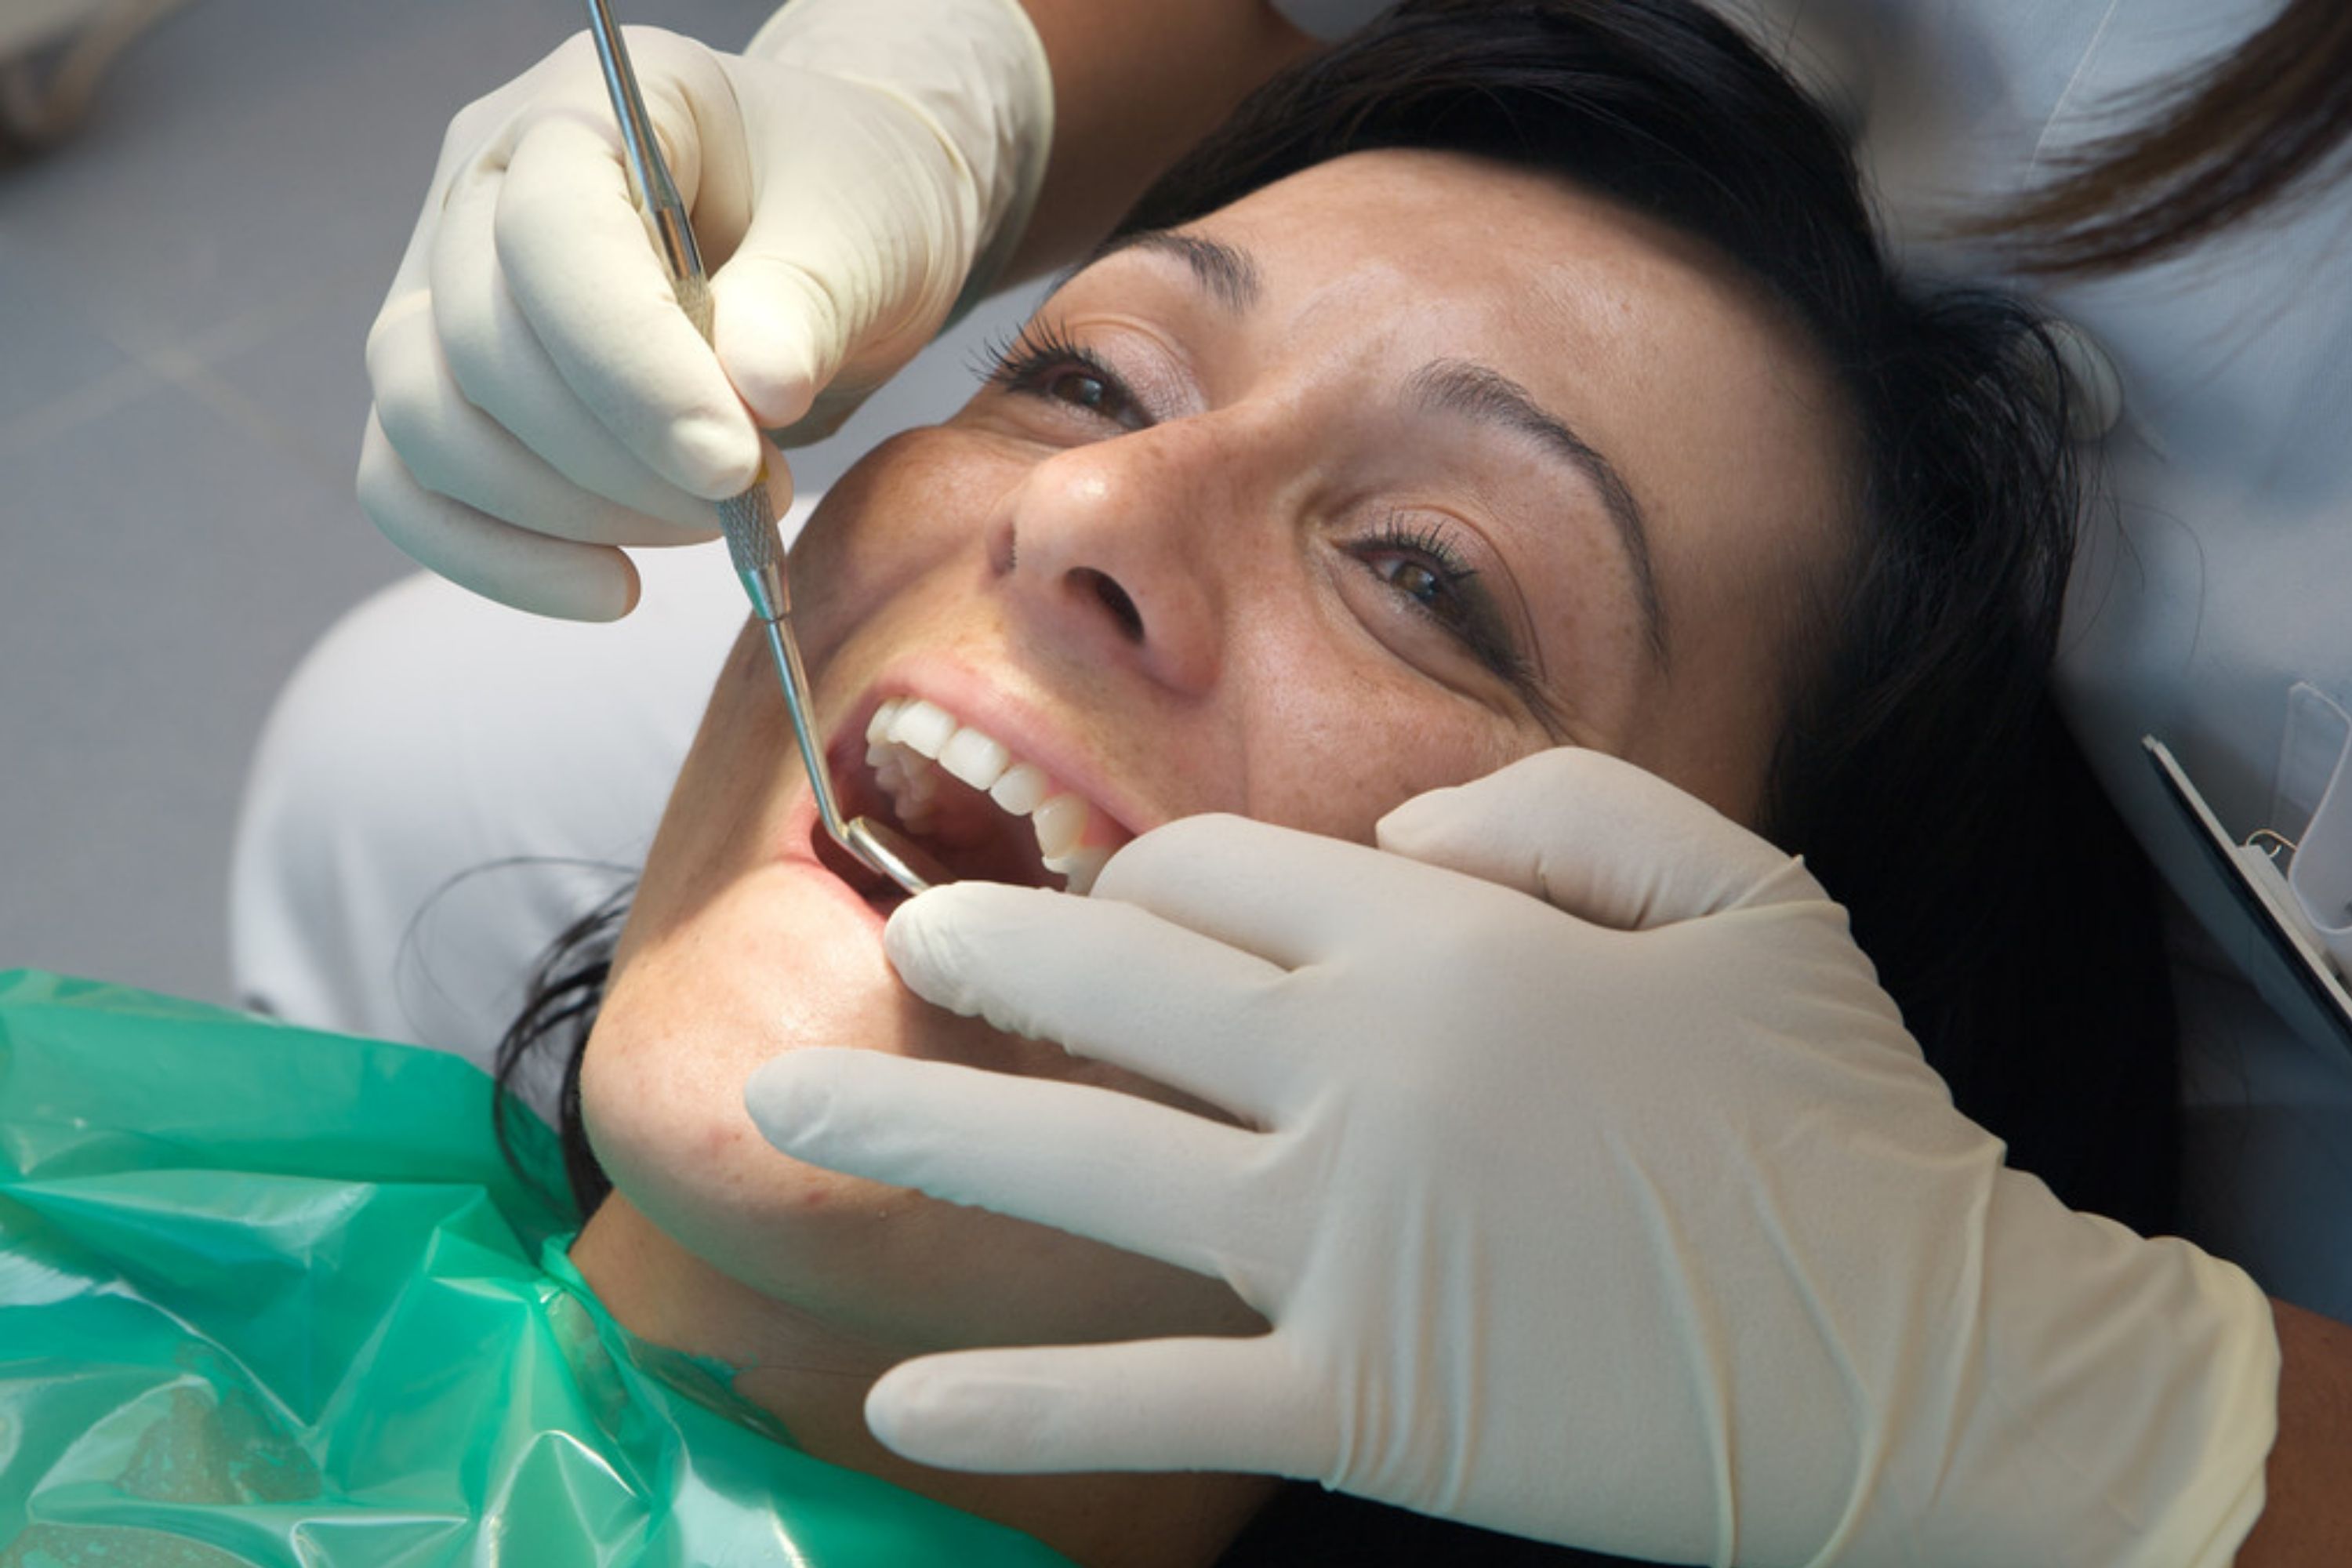 How Long Does a Dental Cleaning Usually Take